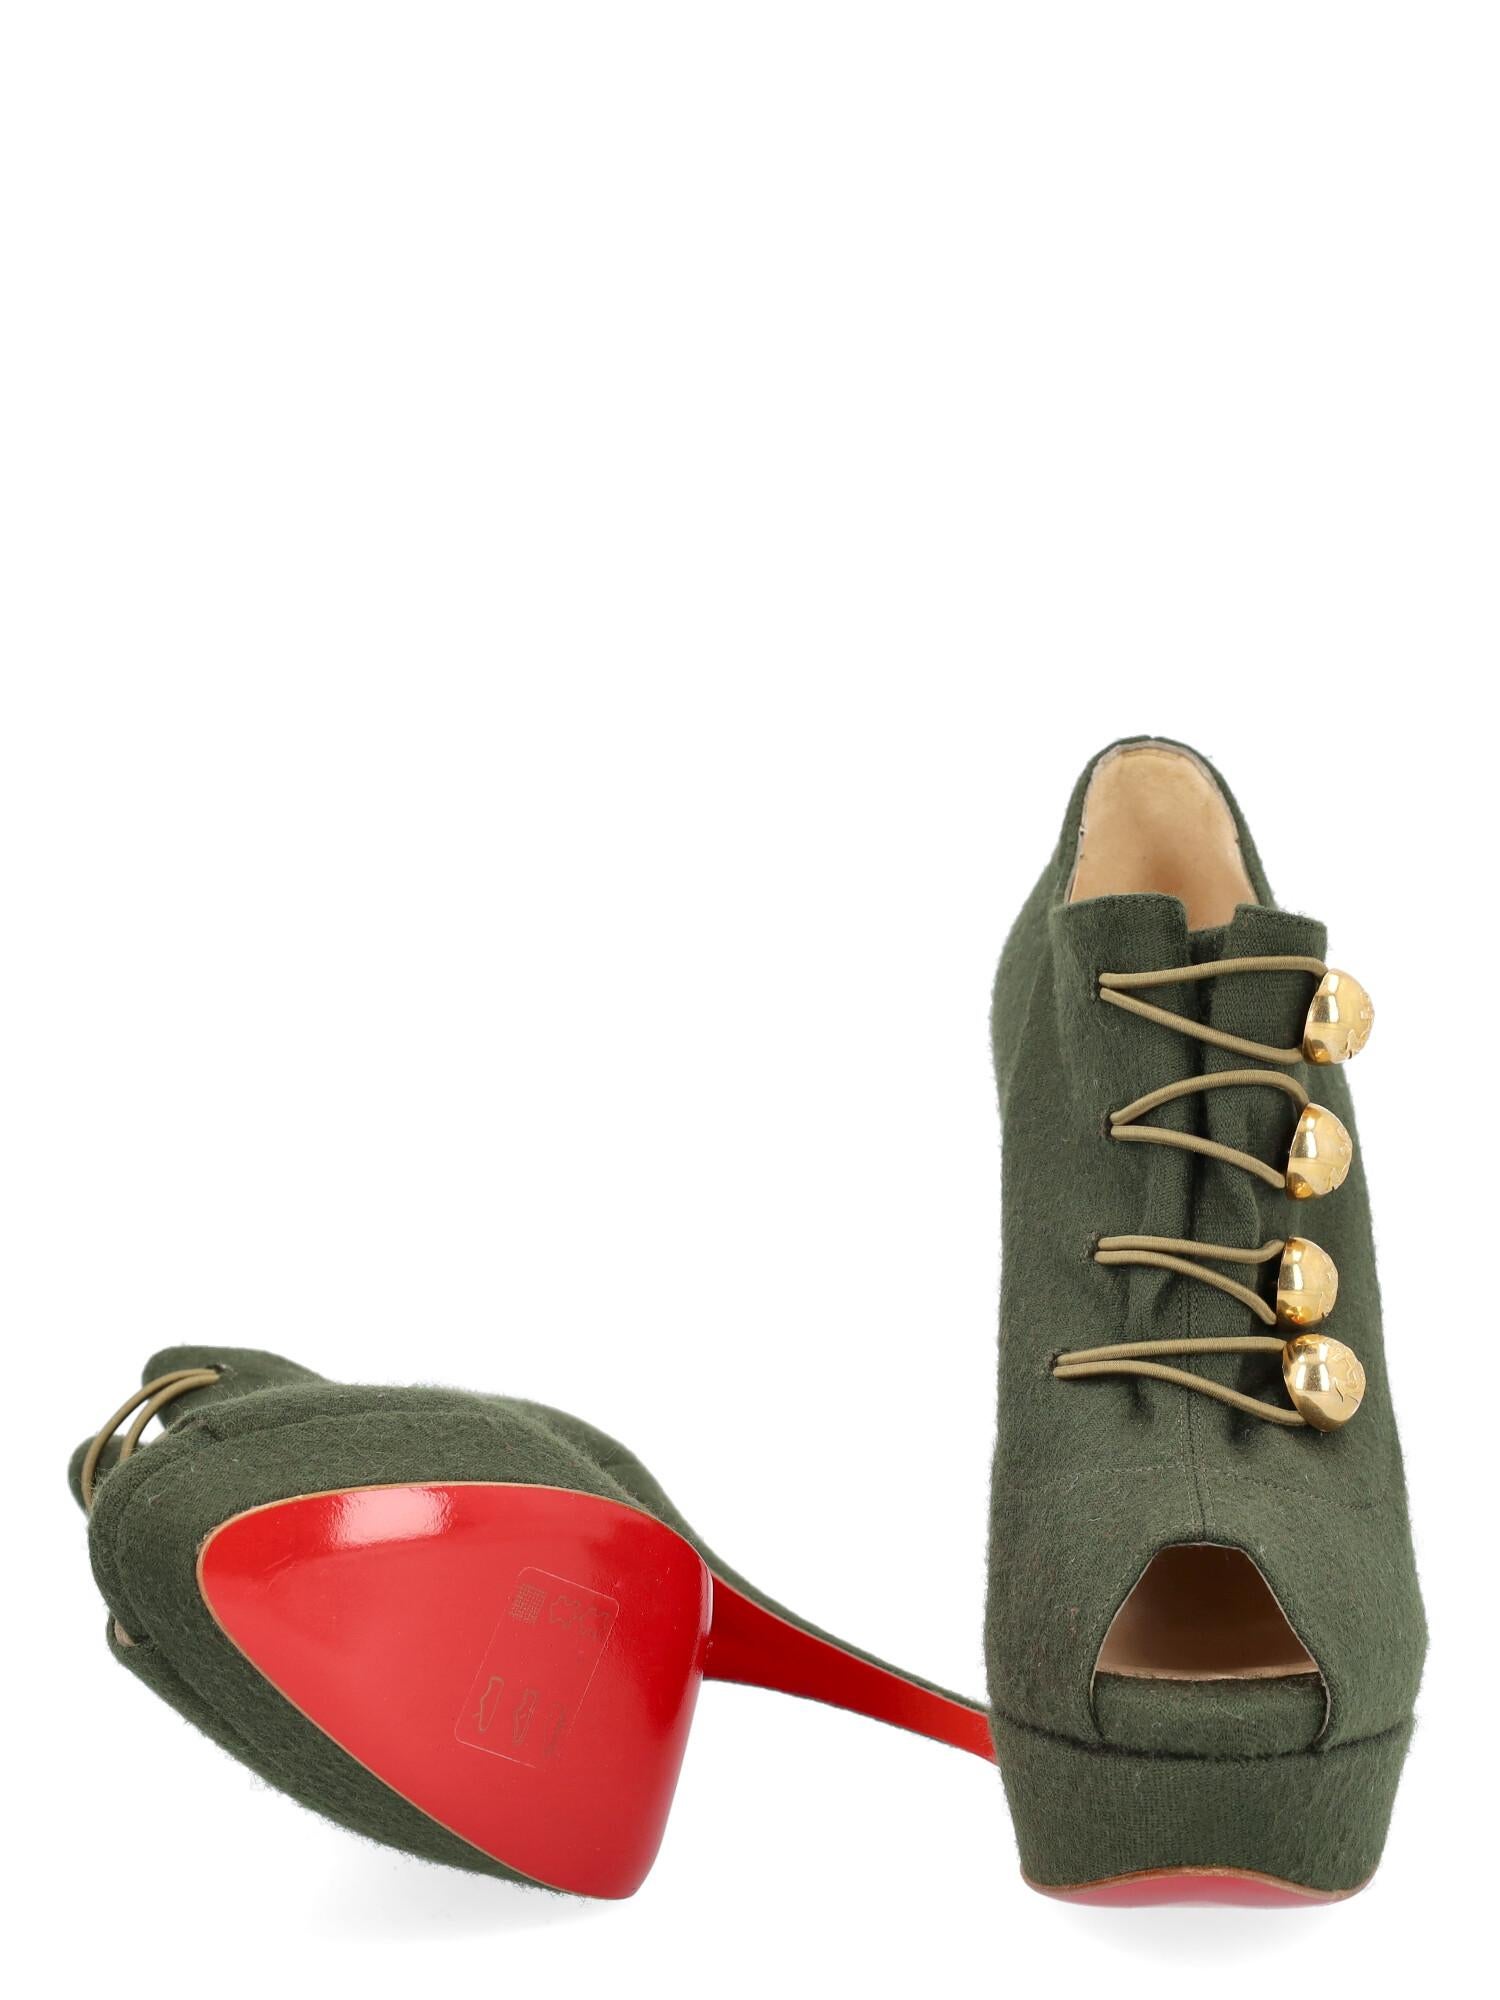 green louboutin boots